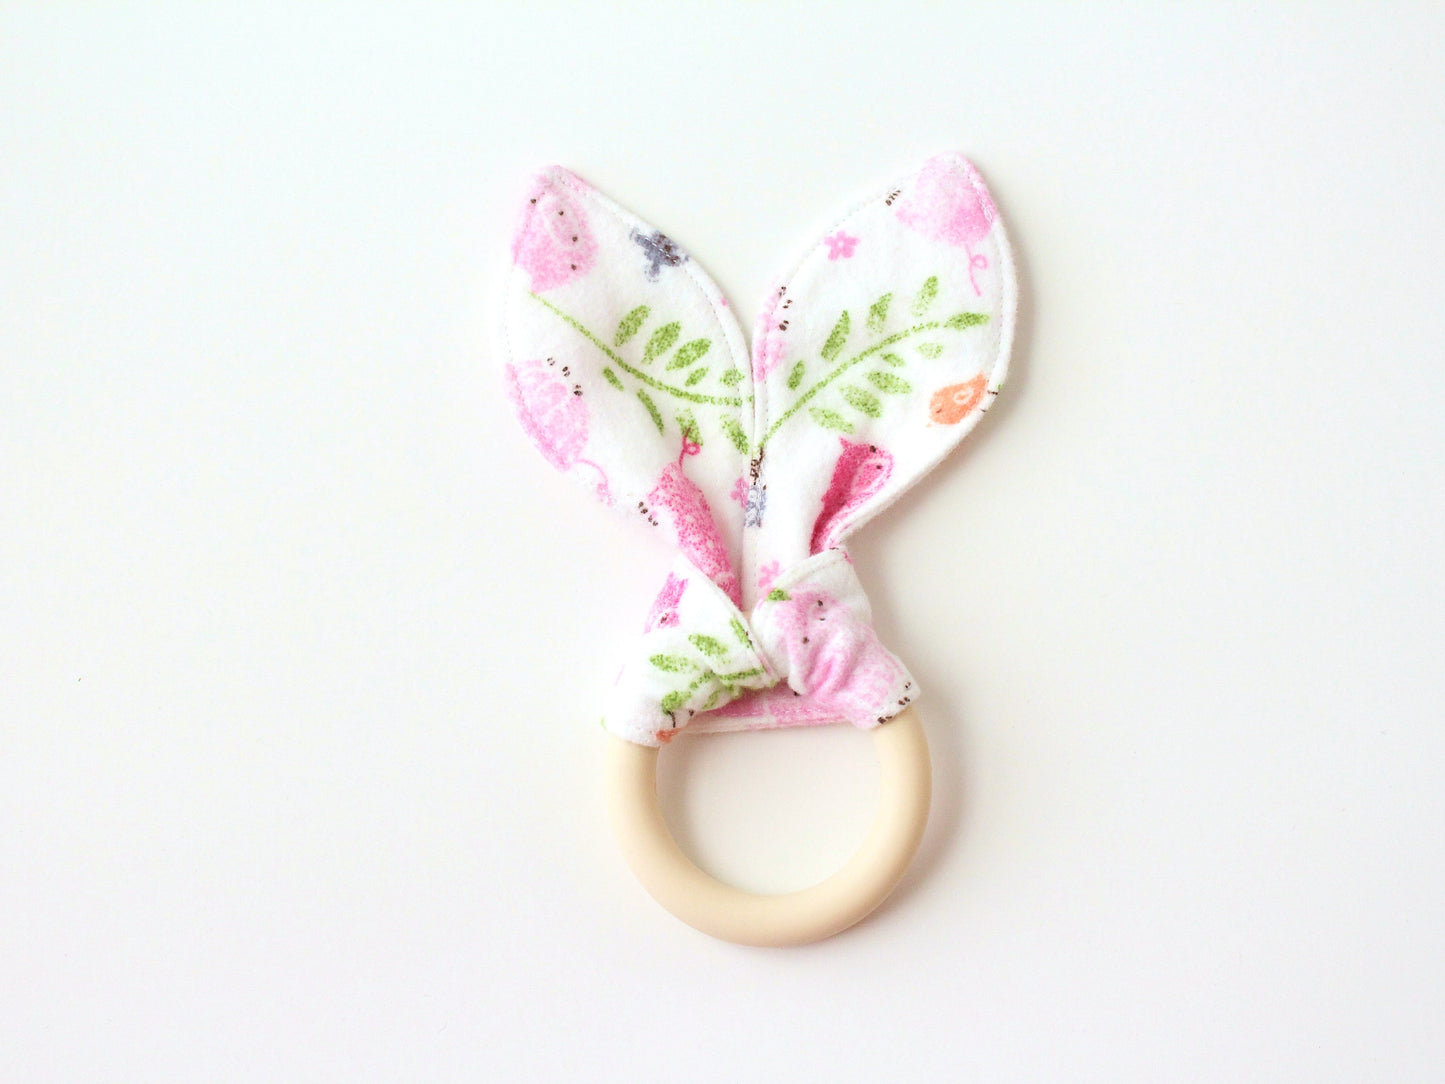 Pig Silicone Bunny Ear Teether | Gender Neutral Baby Shower Gift Sensory Toy | CPSC Compliant